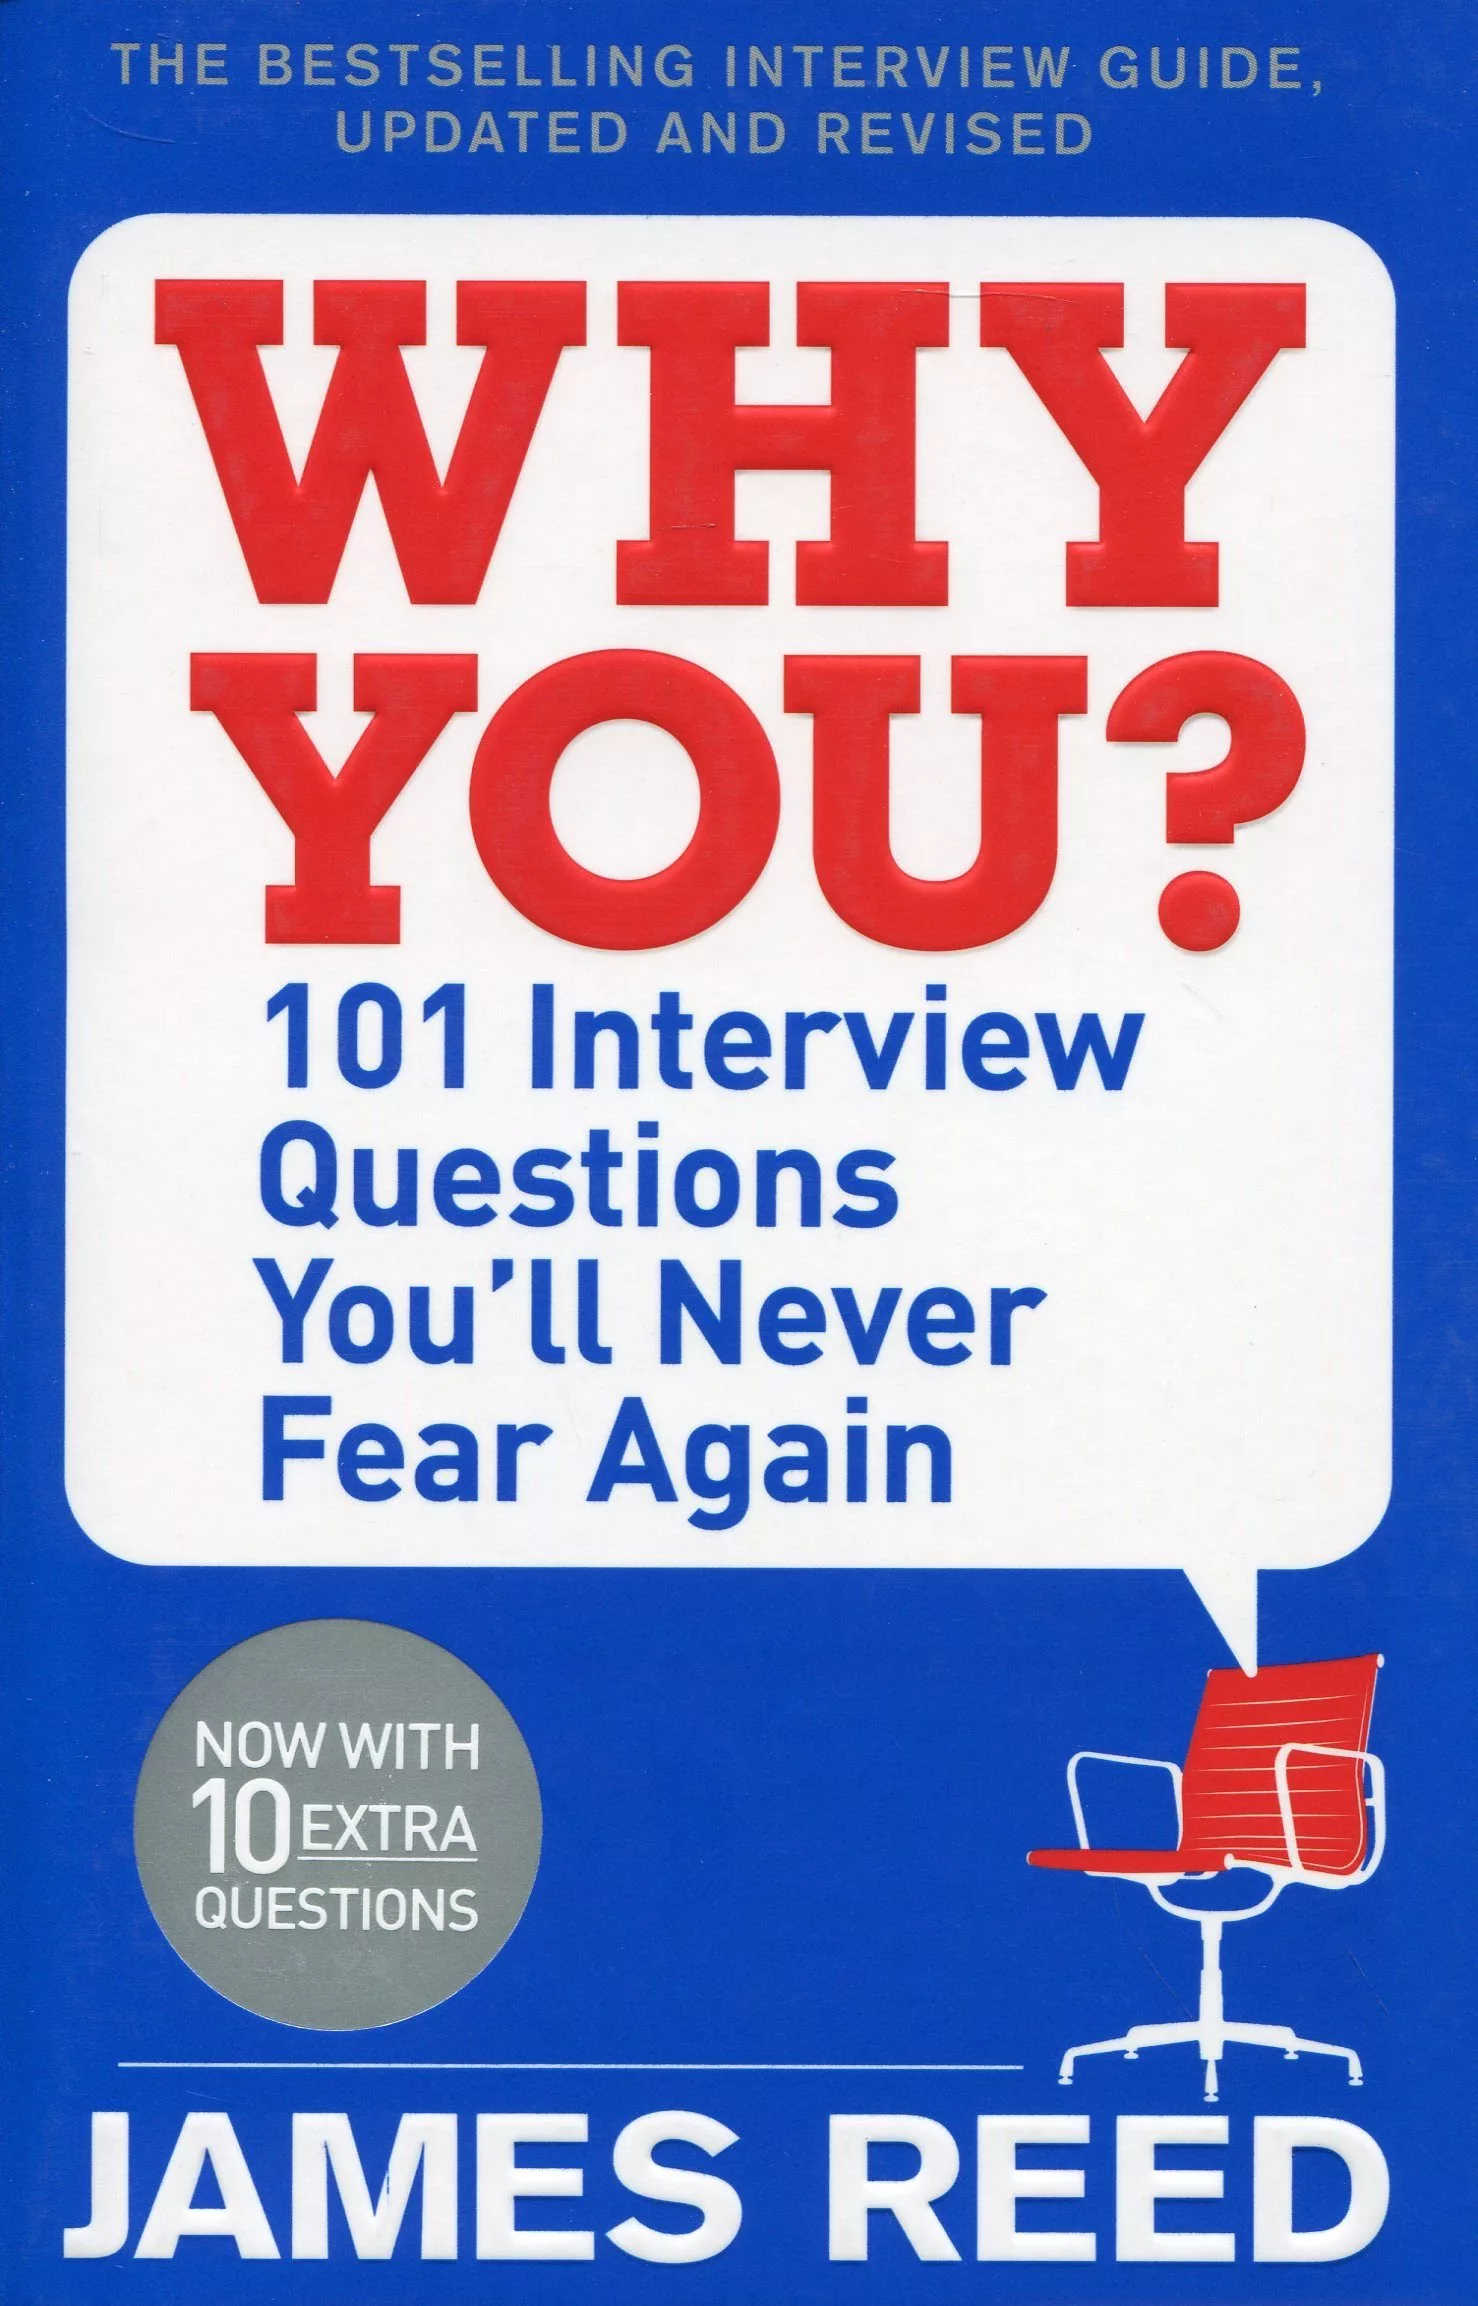 Why You?: 101 Interview Questions You’ll Never Fear Again